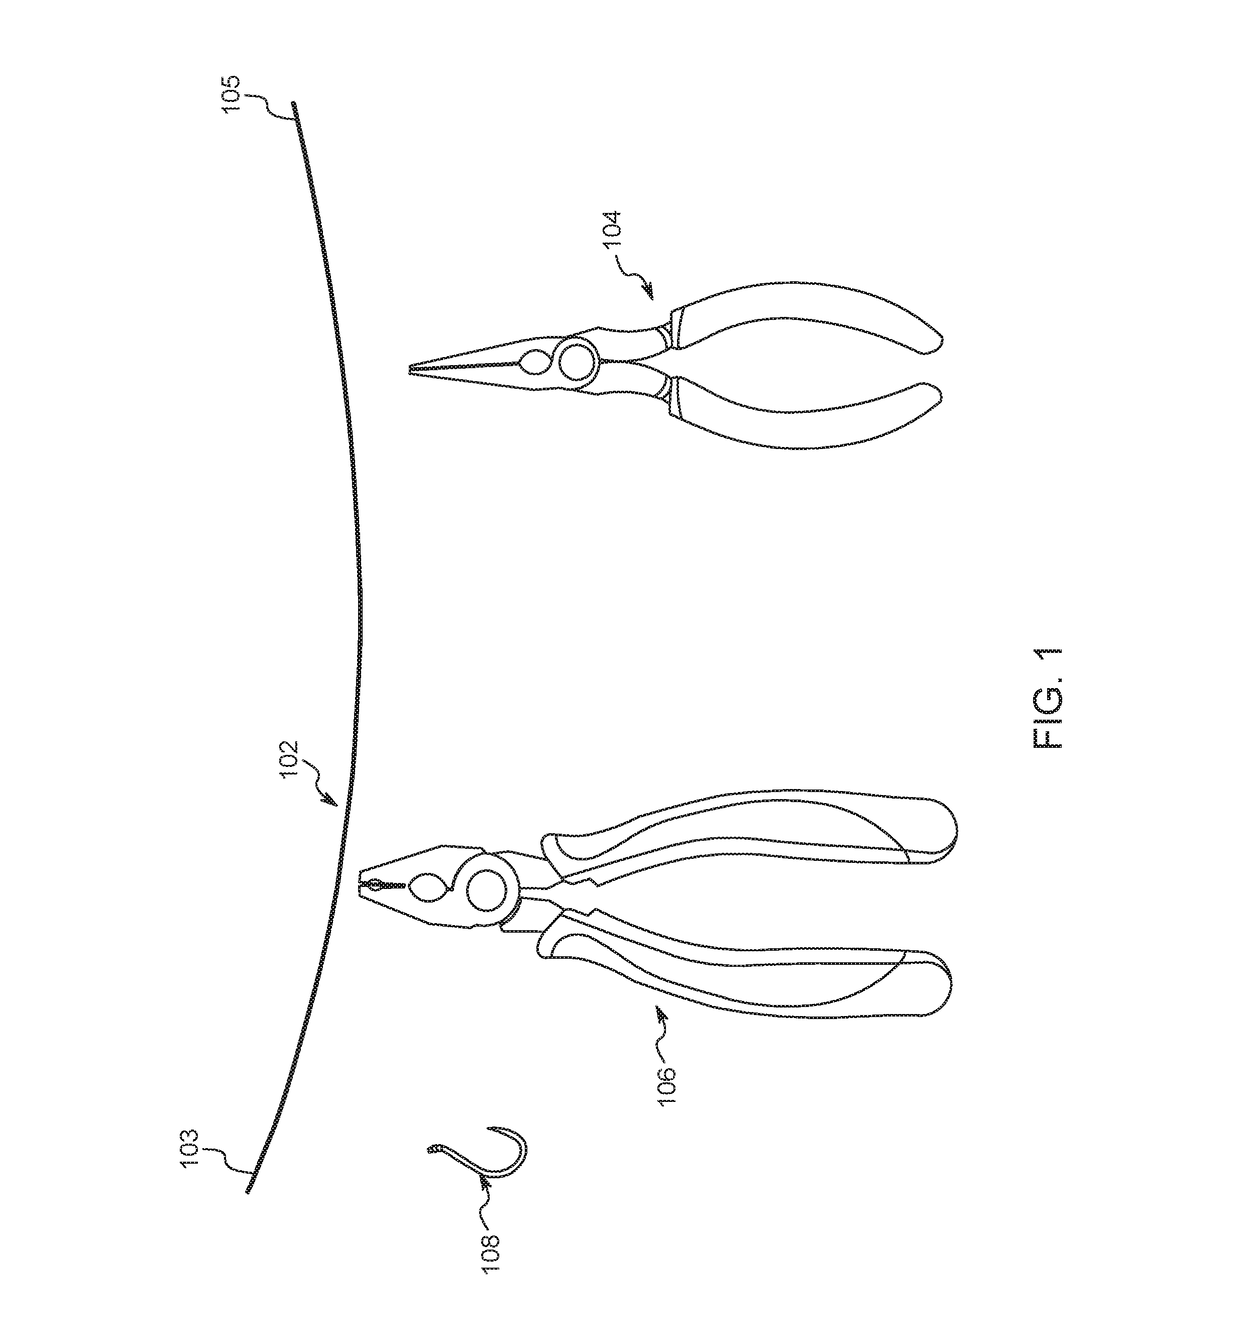 Self-locking spring method for snelling single strand wire to fishing hooks